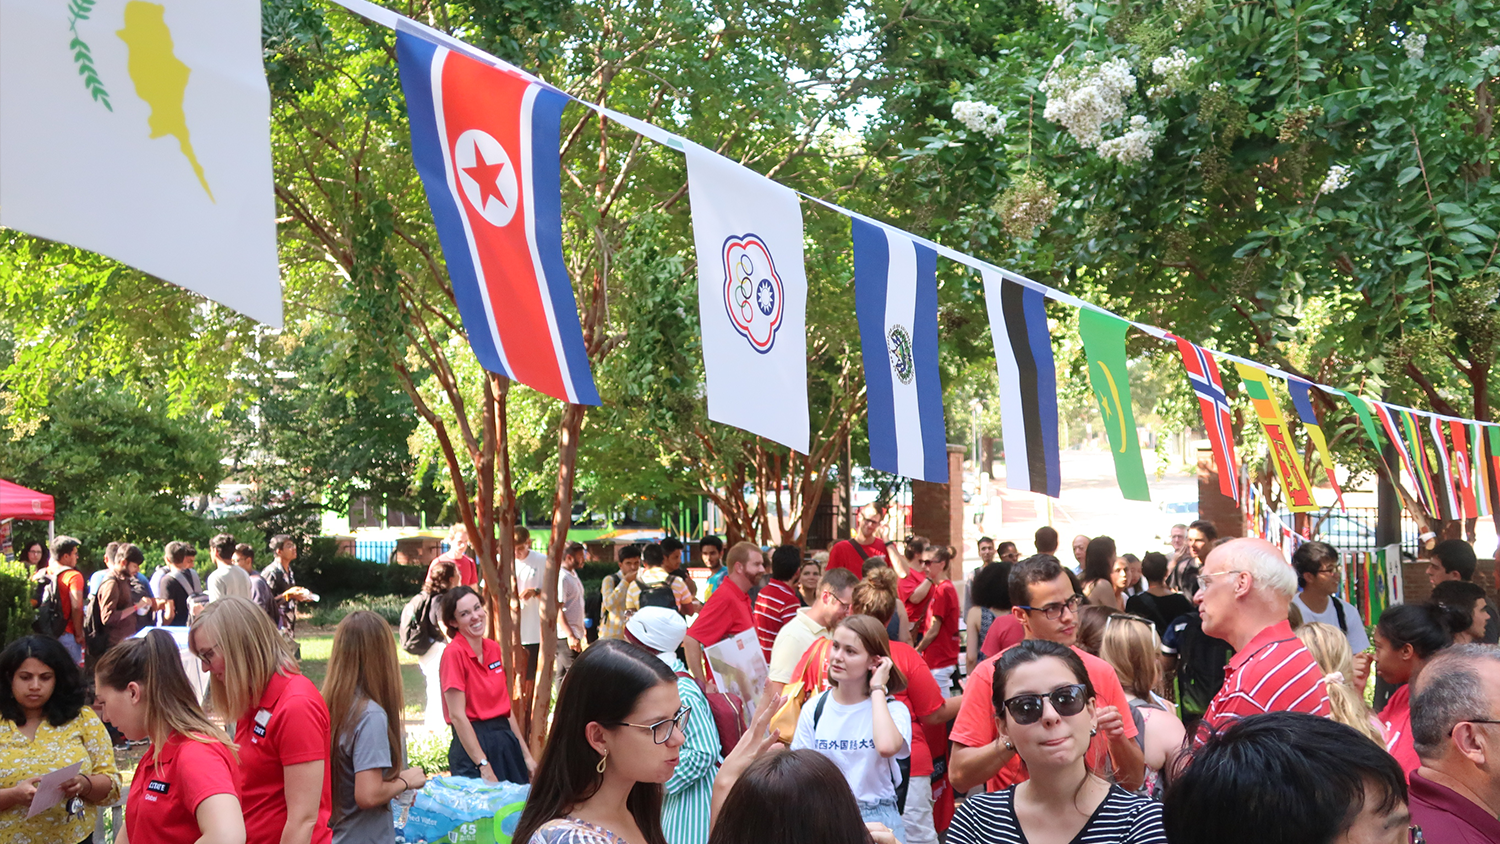 A busy crowd of staff and students gathers oustide for the Global Welcome. The place is decorated with flags.